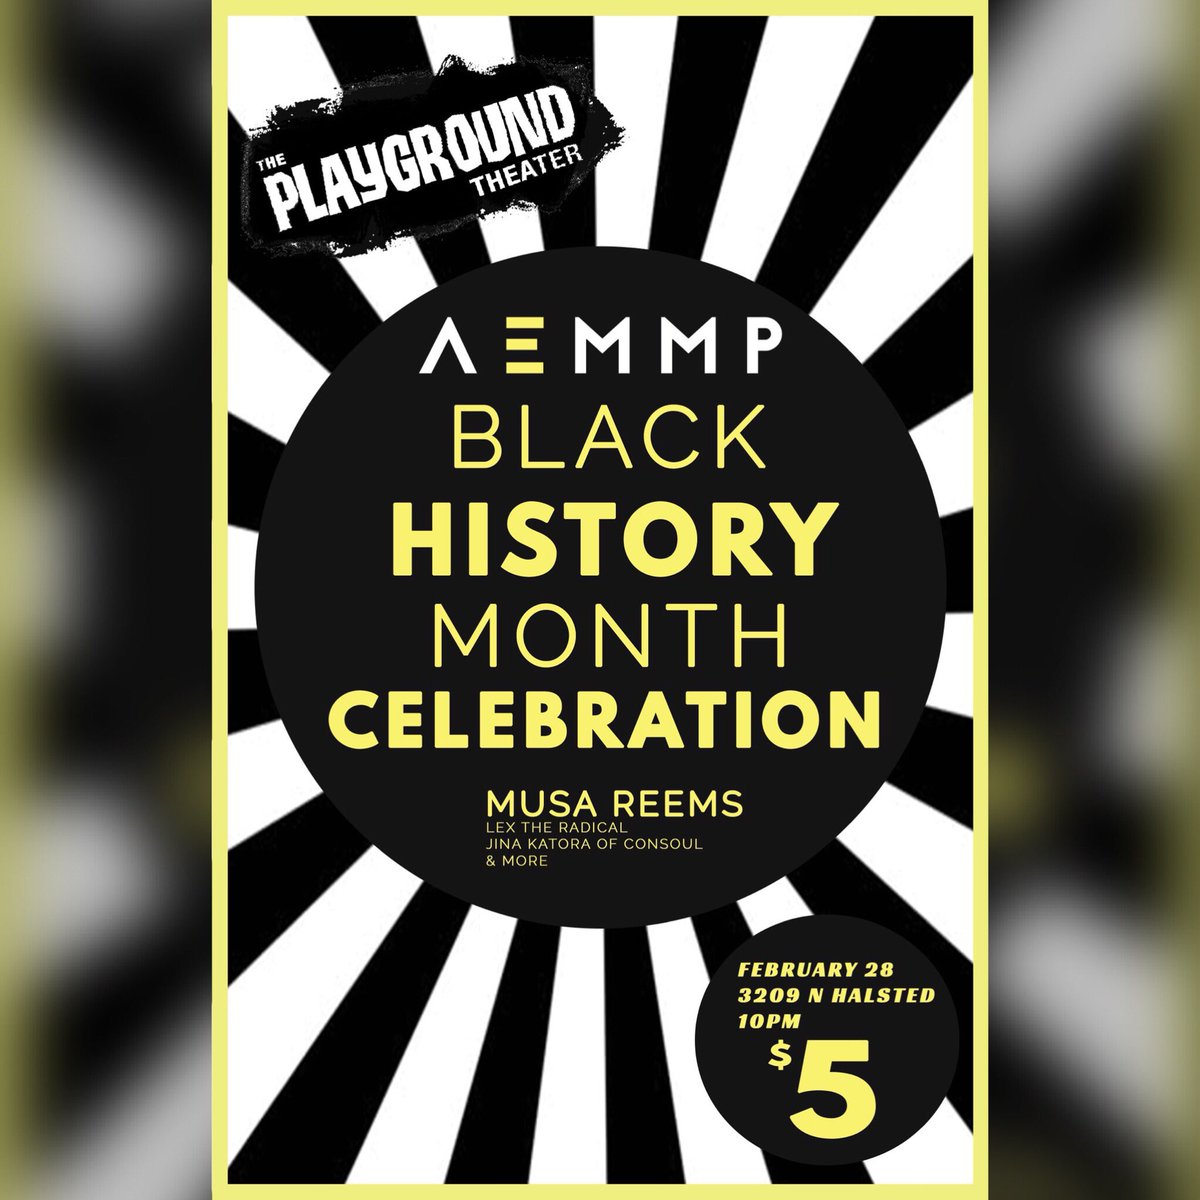 @aemmphiphop are throwing a black history month event next week. Come support & see some dope artists! @musareems @lextheradical @damn_jina and more! #chicago #chicagoartist #emergingartists #musicshowcase #hiphop #chicagohiphop #talent #columbiacollegechicago #blackhistorymonth